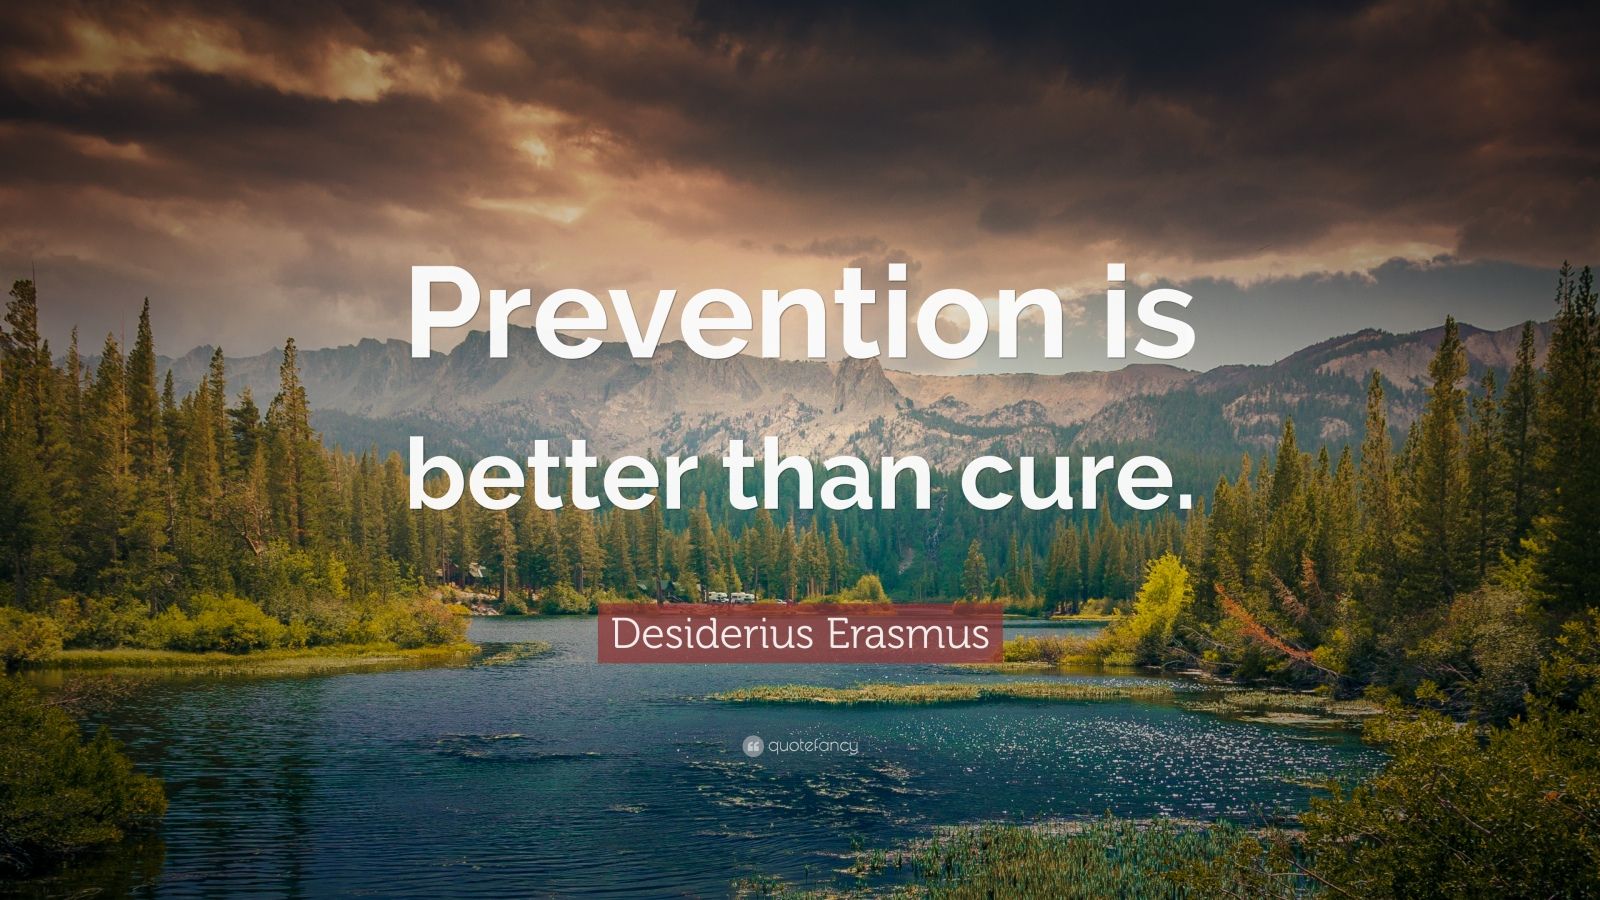 prevention is better than cure speech